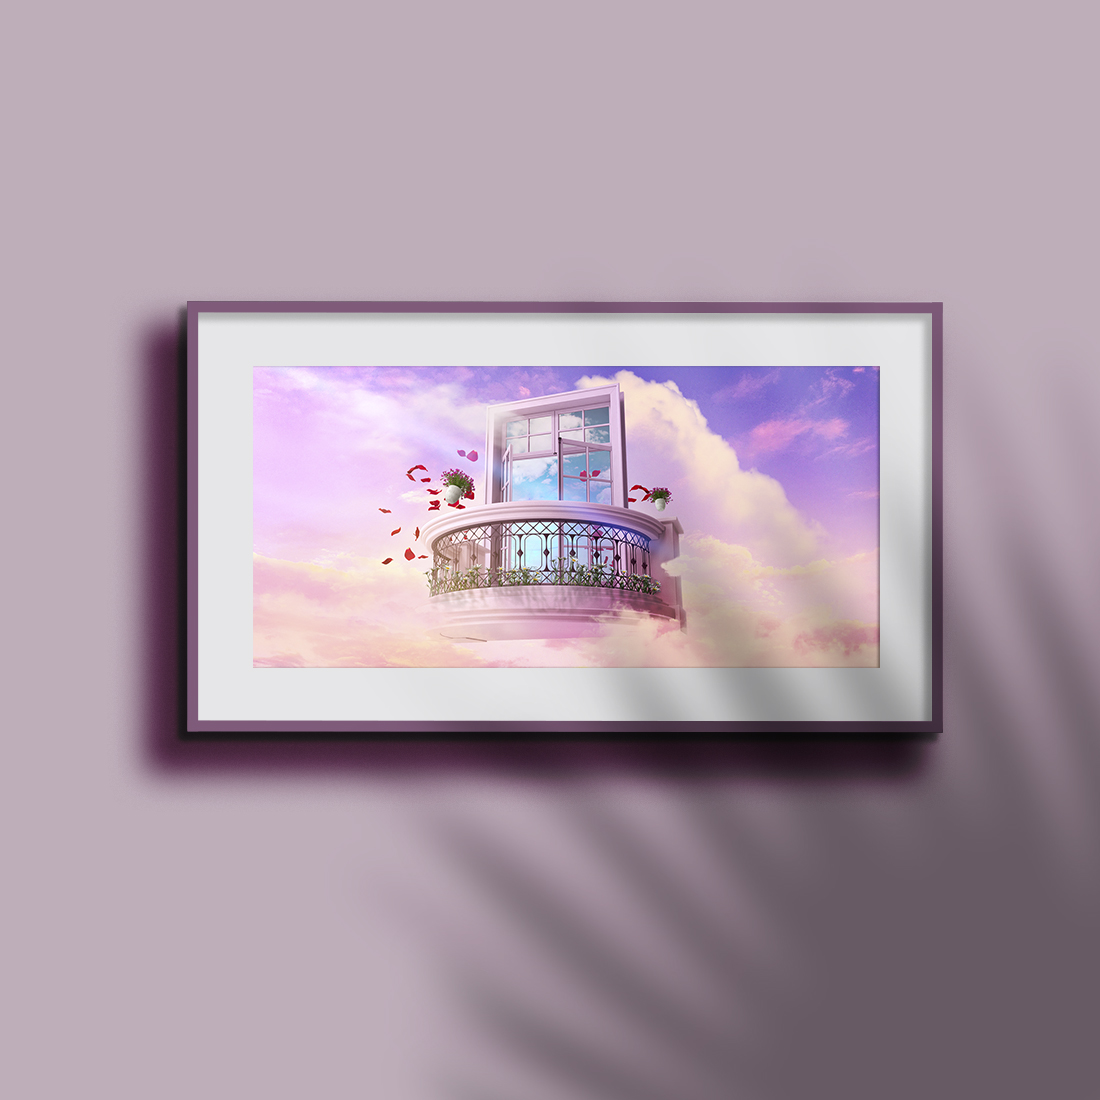 fly balcony in purple sky with red flower preview image.